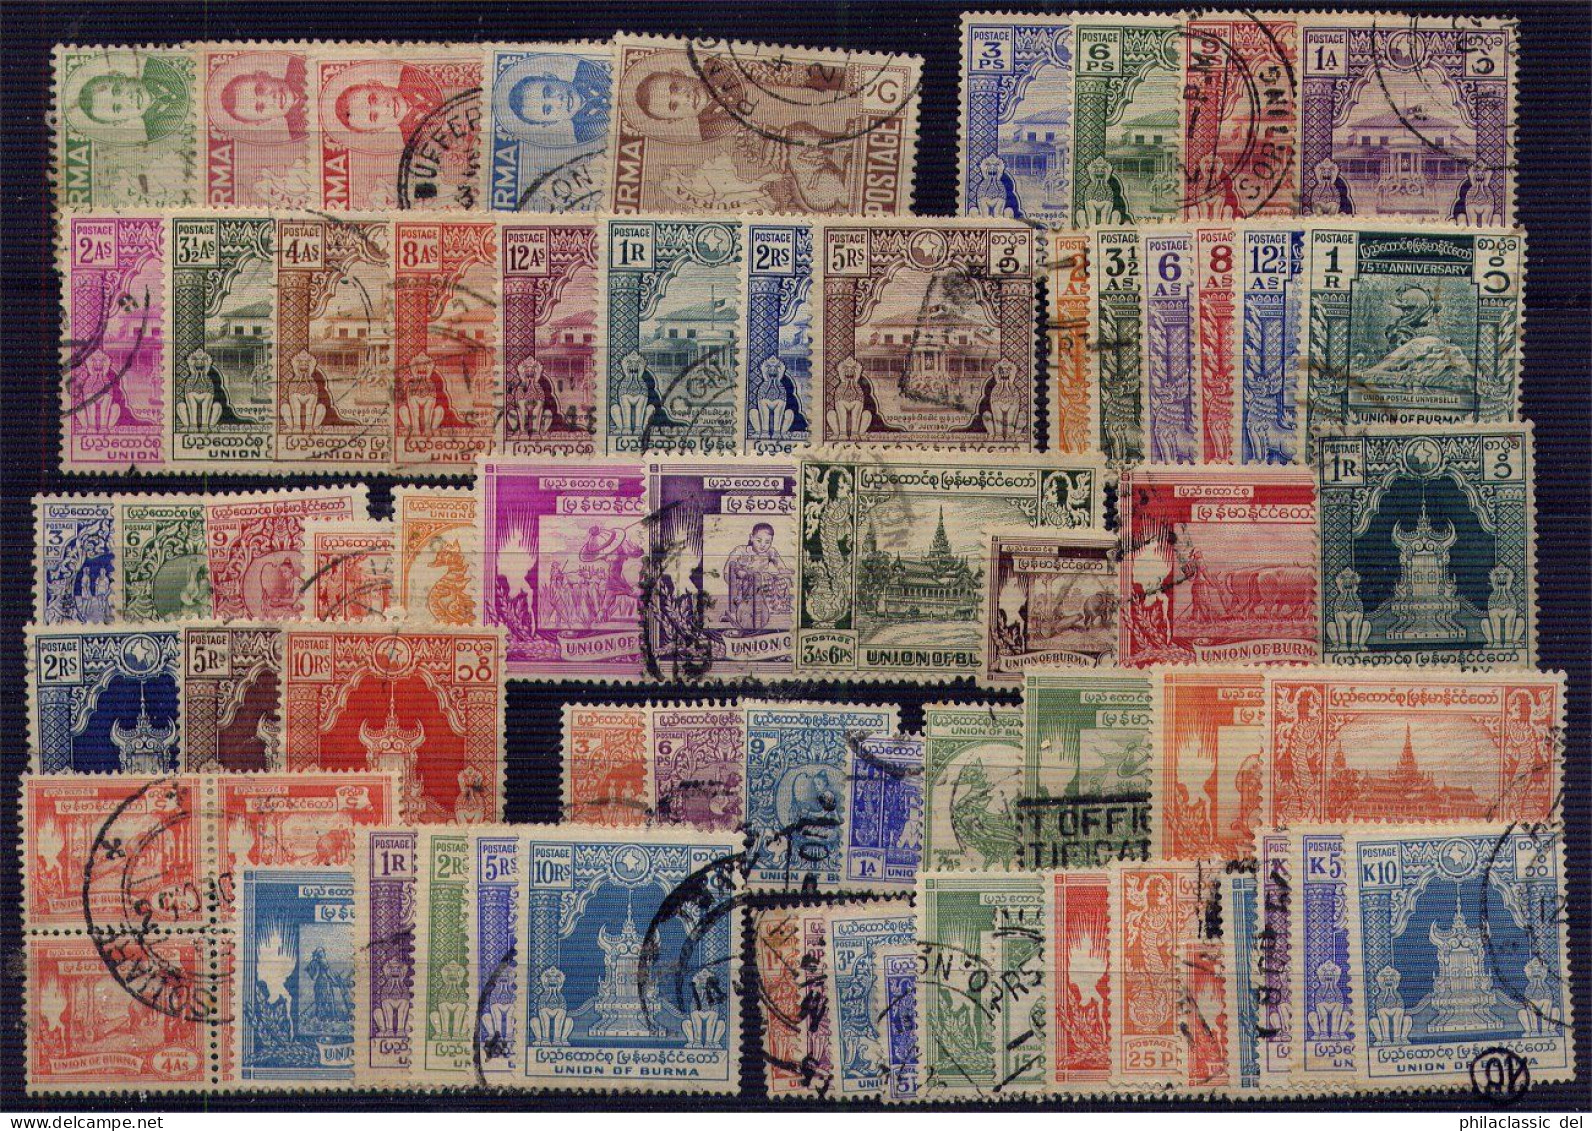 BURMA 1938 - 1954, Very Nice Nearly Complete Collection Fine Cancelled Cat Val 1150 Pounds - Birma (...-1947)